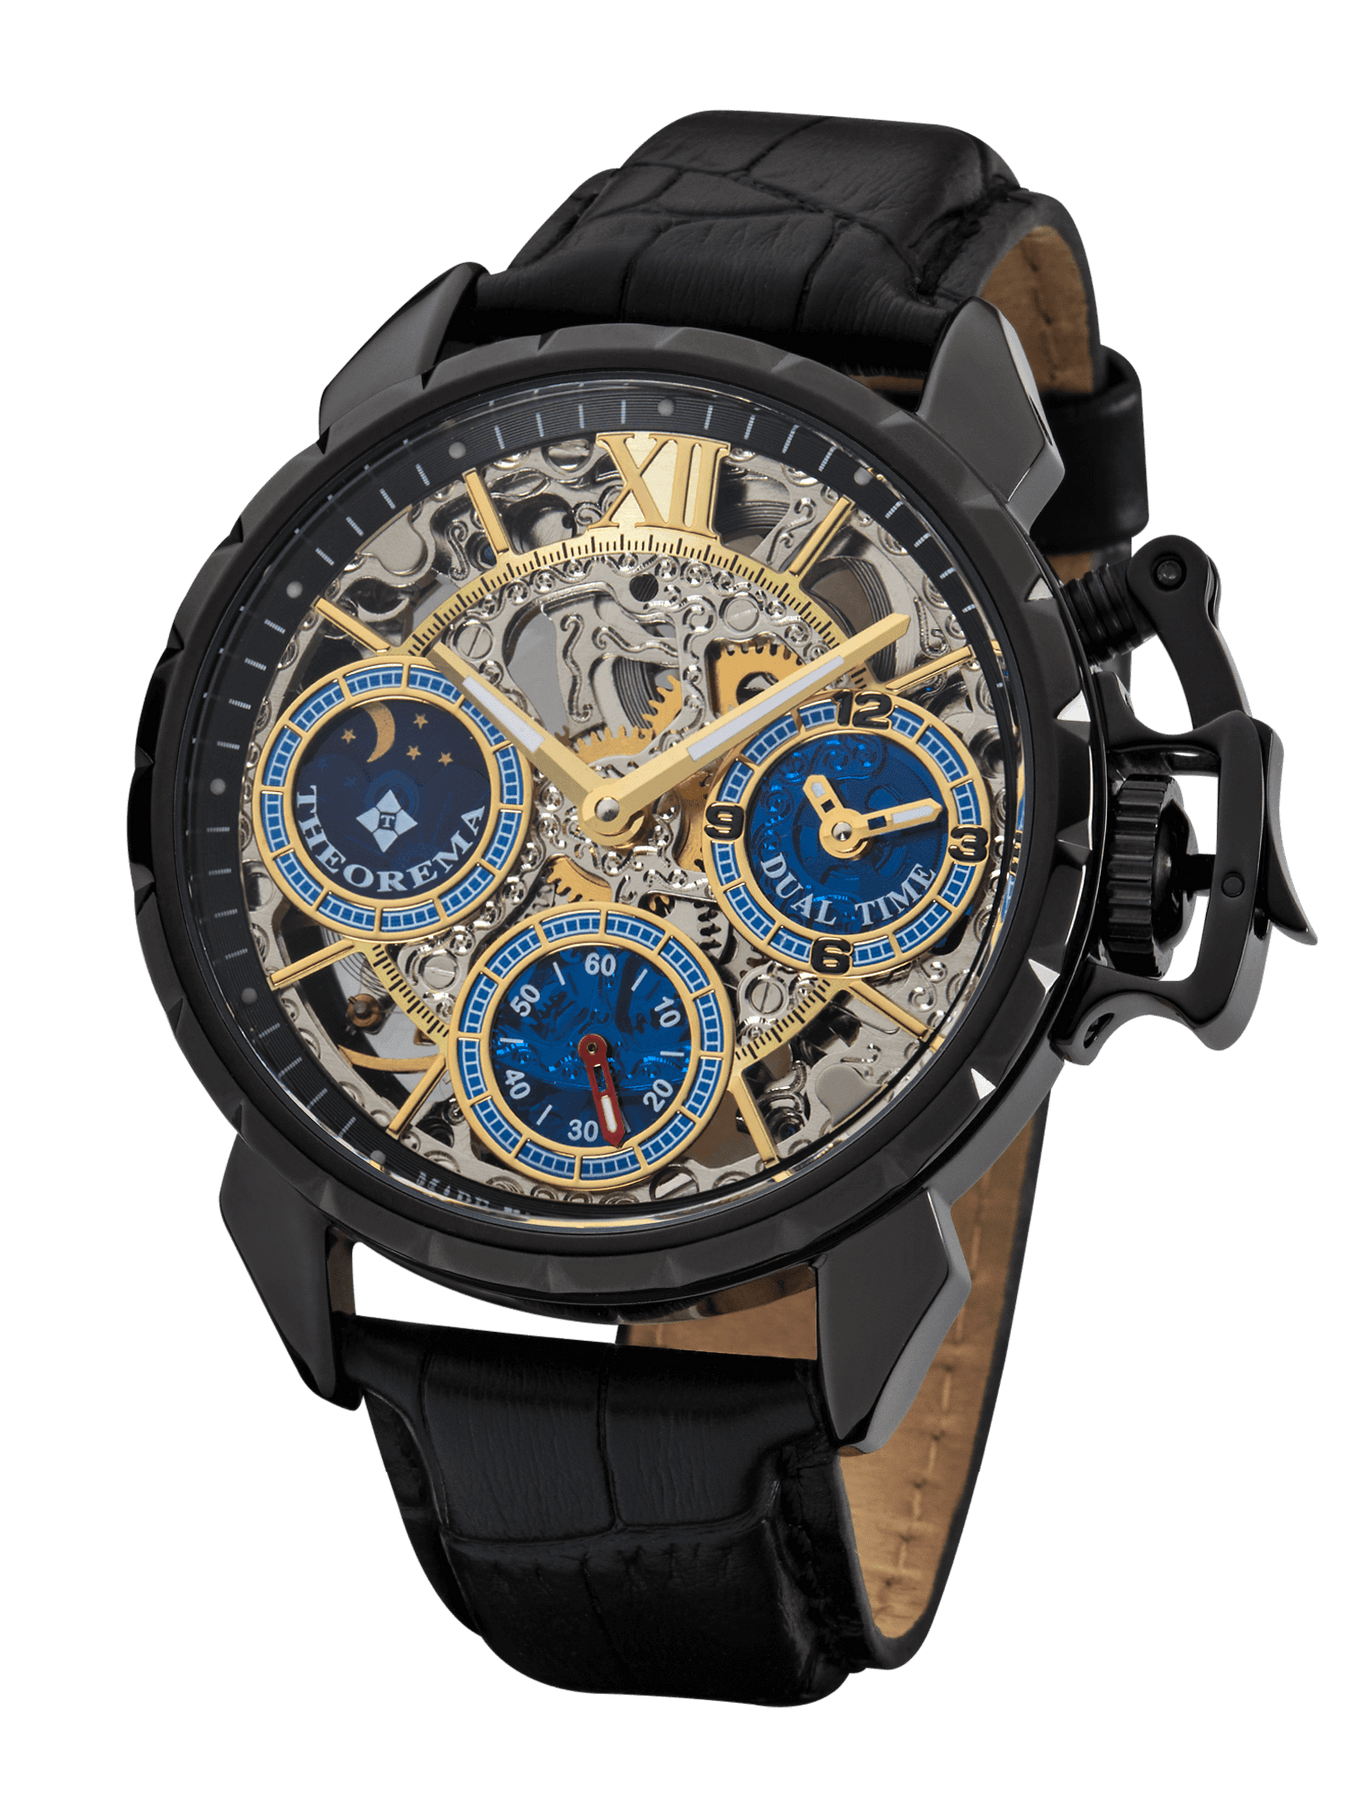 Oman Theorema mechanical watch GM-108-4. Three sub-dials for seconds, dual-time, and sun-moon phase.